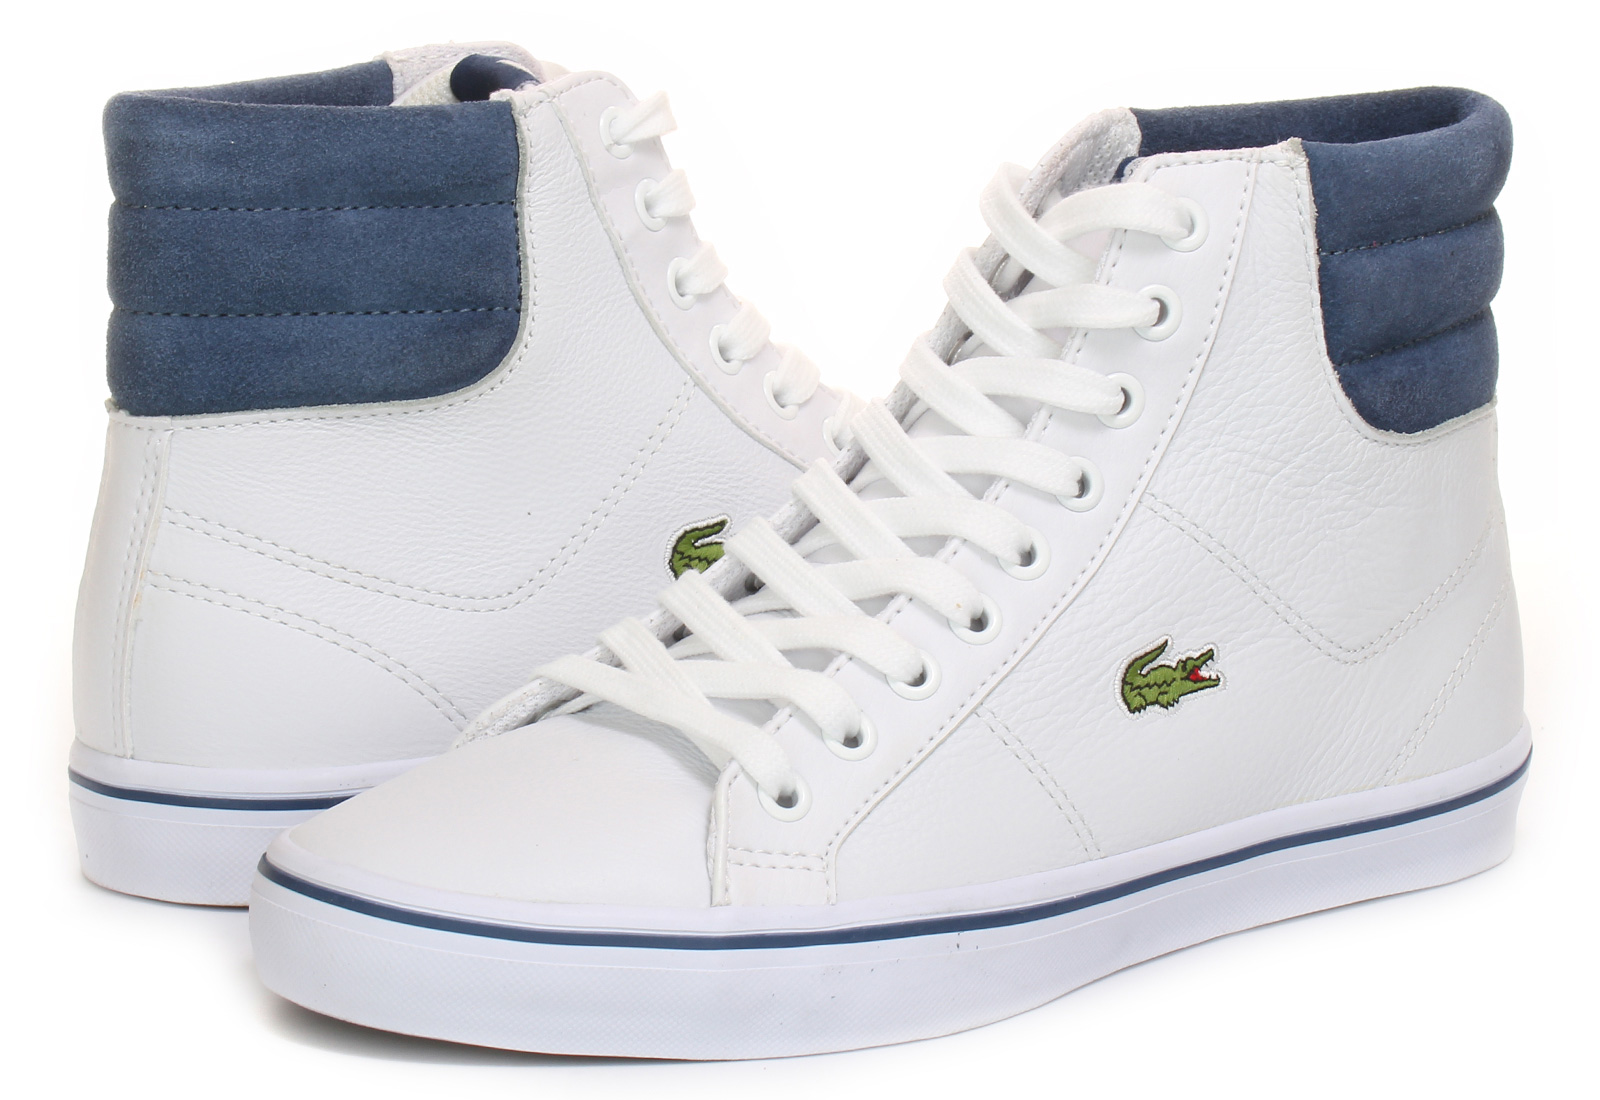 Lacoste Shoes - Marcel Mid Lthr - shop for sneakers, shoes and boots